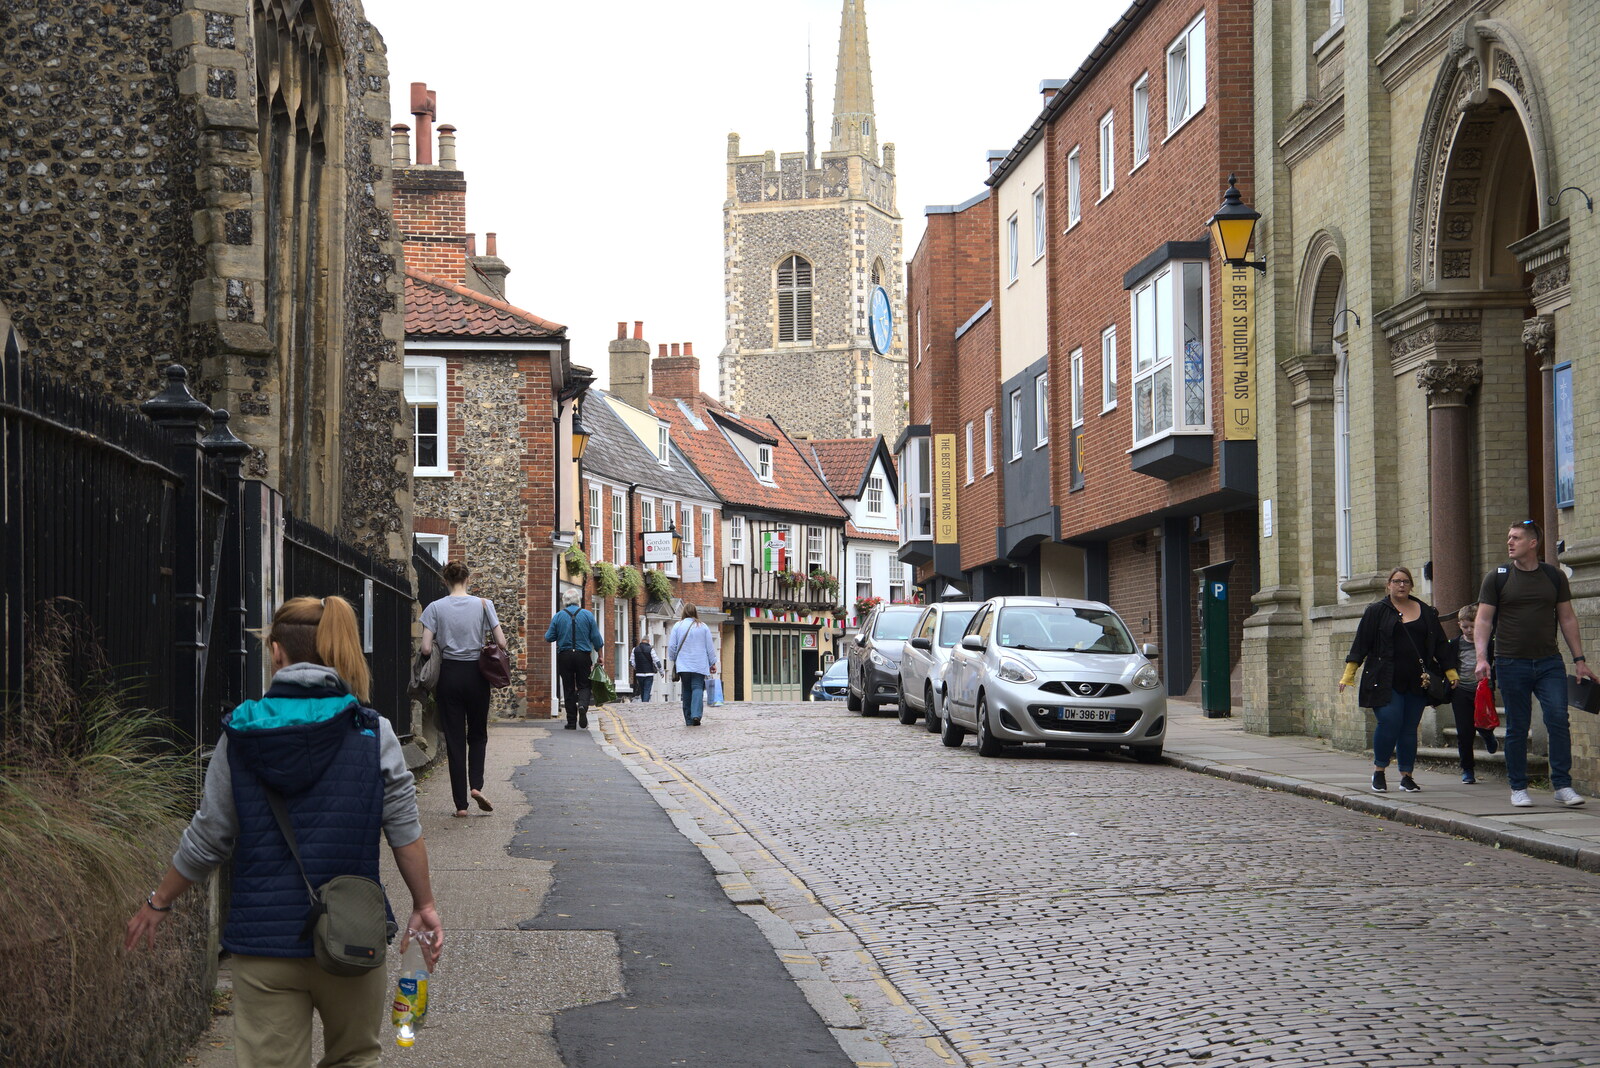 Looking down Princes Street from Dippy and the City Dinosaur Trail, Norwich, Norfolk - 19th August 2021